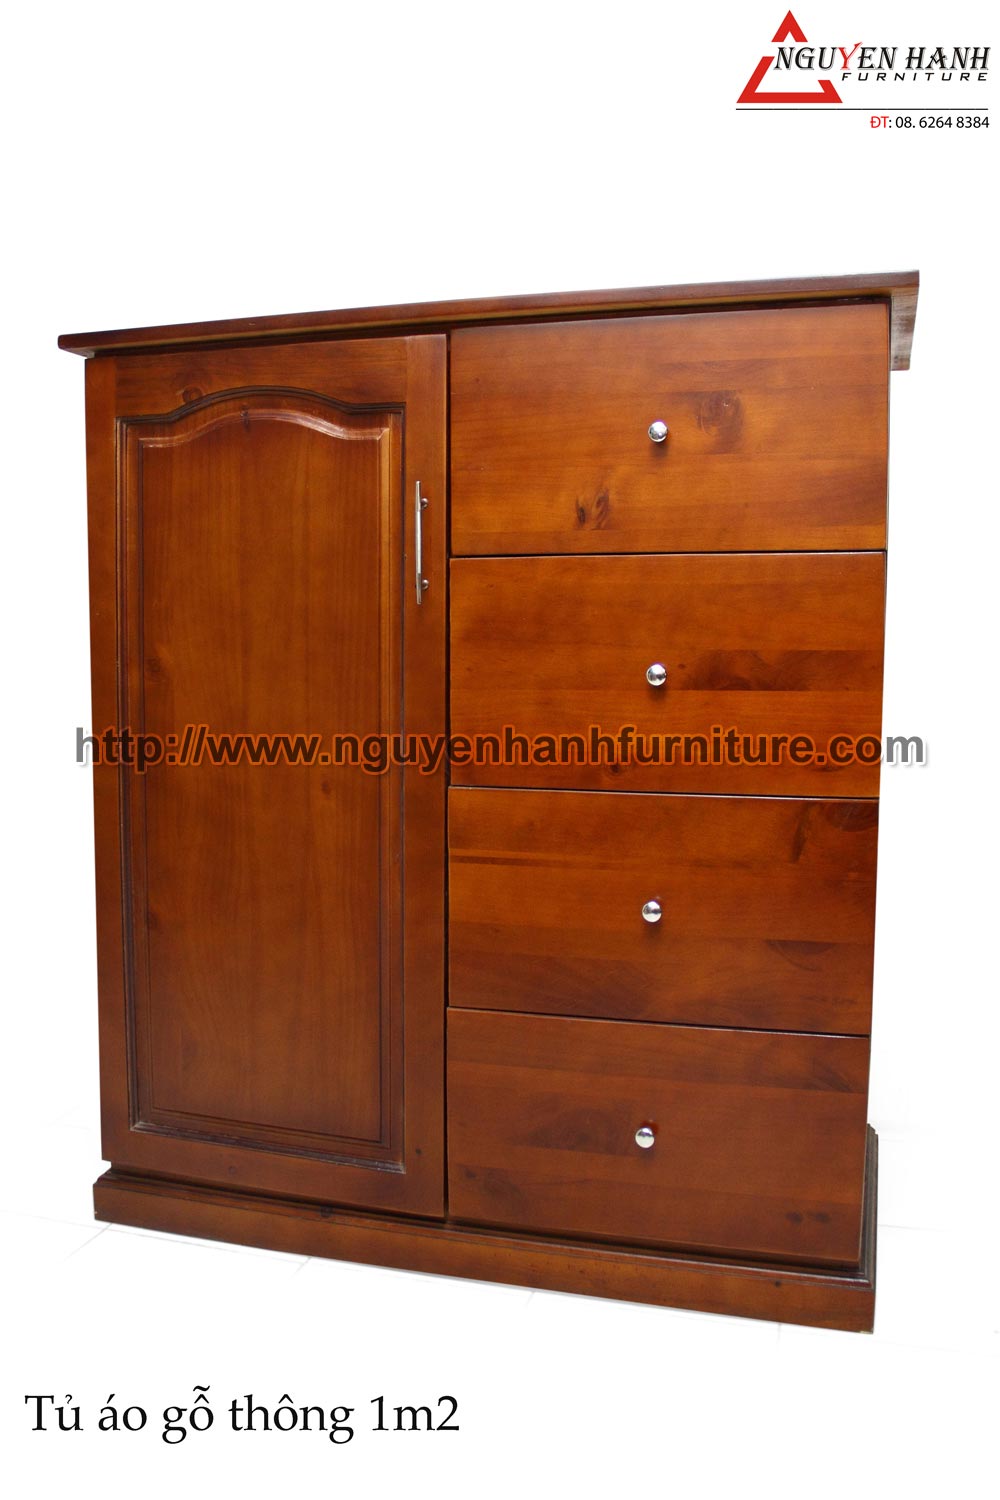 Name product: 1m2 Brown Pine wood Wardrobe with drawers 